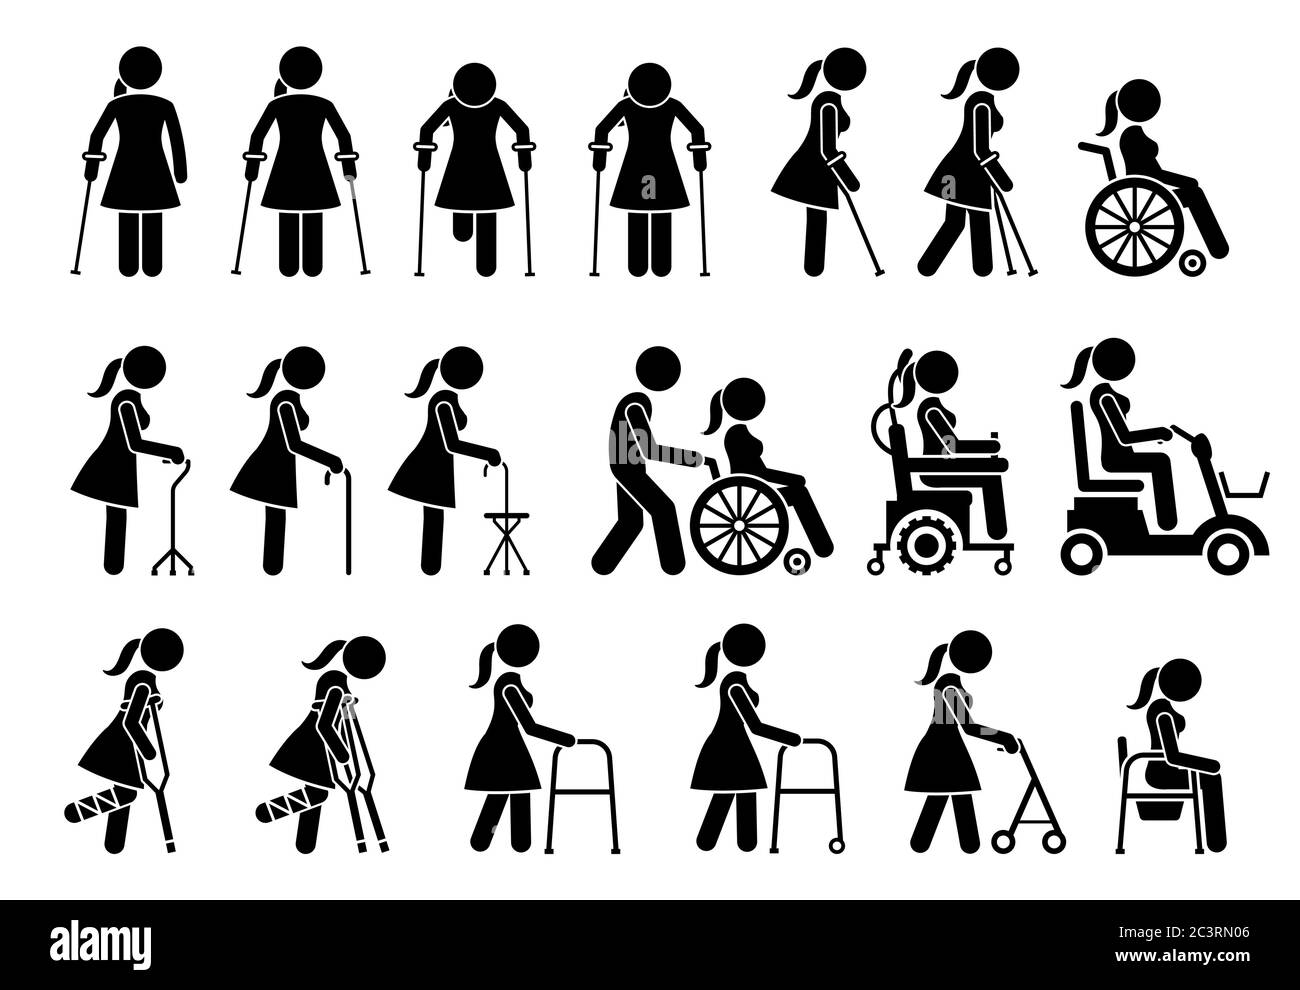 Mobility aids medical tools and equipment stick figure pictogram icons. Artwork signs symbols depicts woman walking with crutches, wheelchair, cane, e Stock Vector